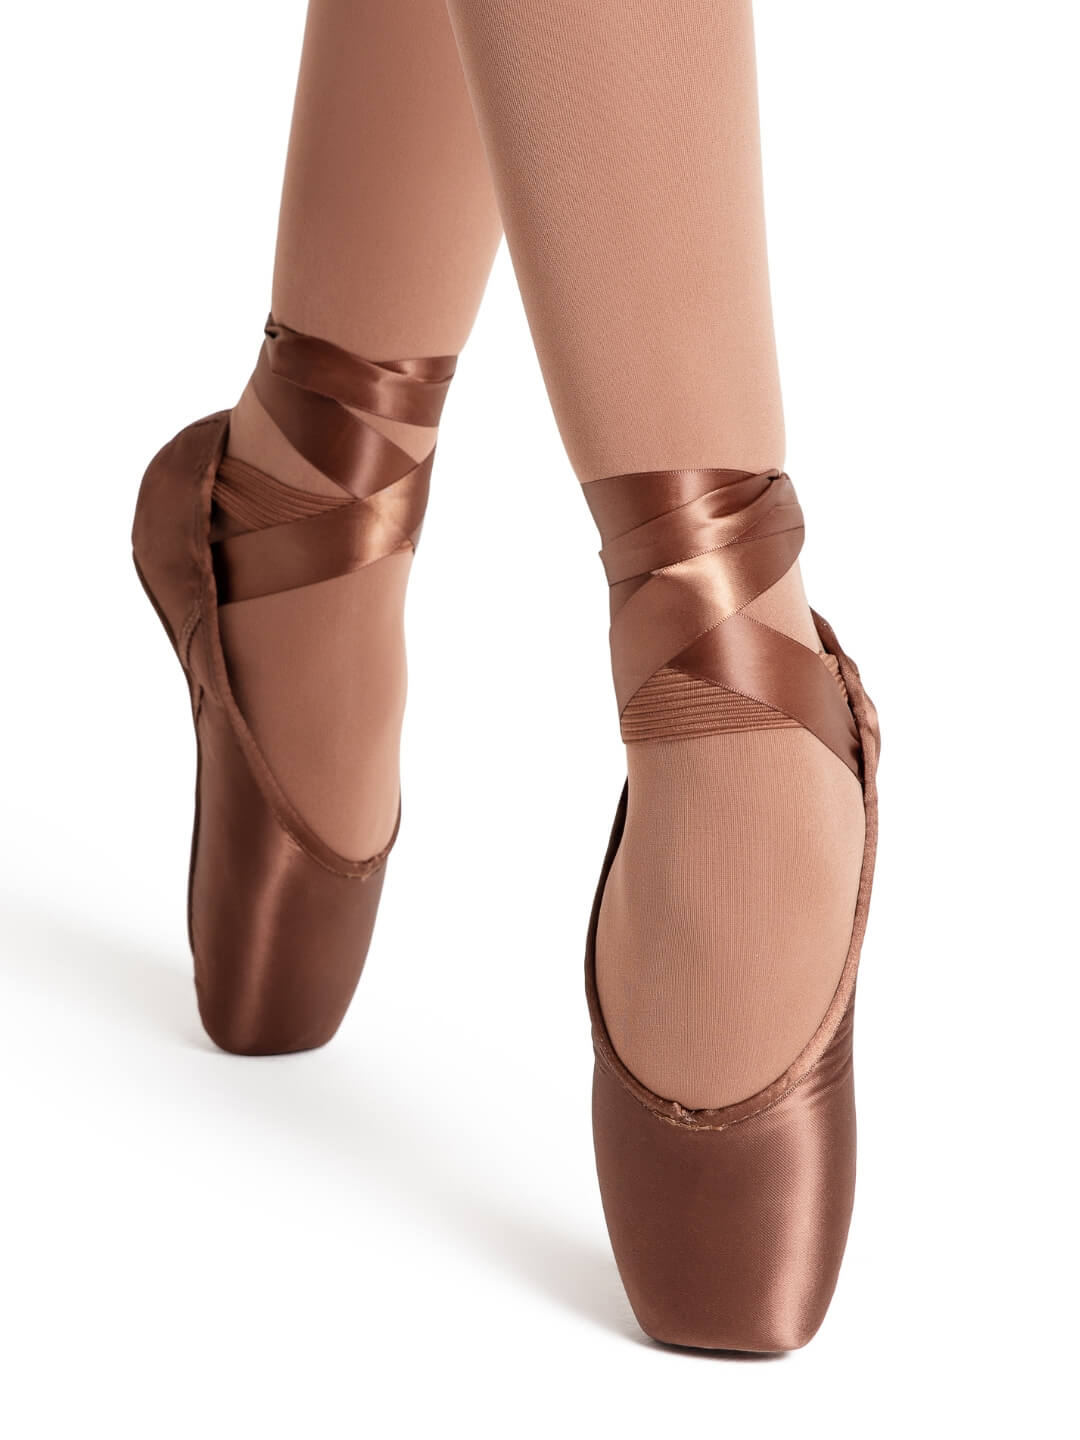 Hanami Ballet Slippers – The Pointe Shop